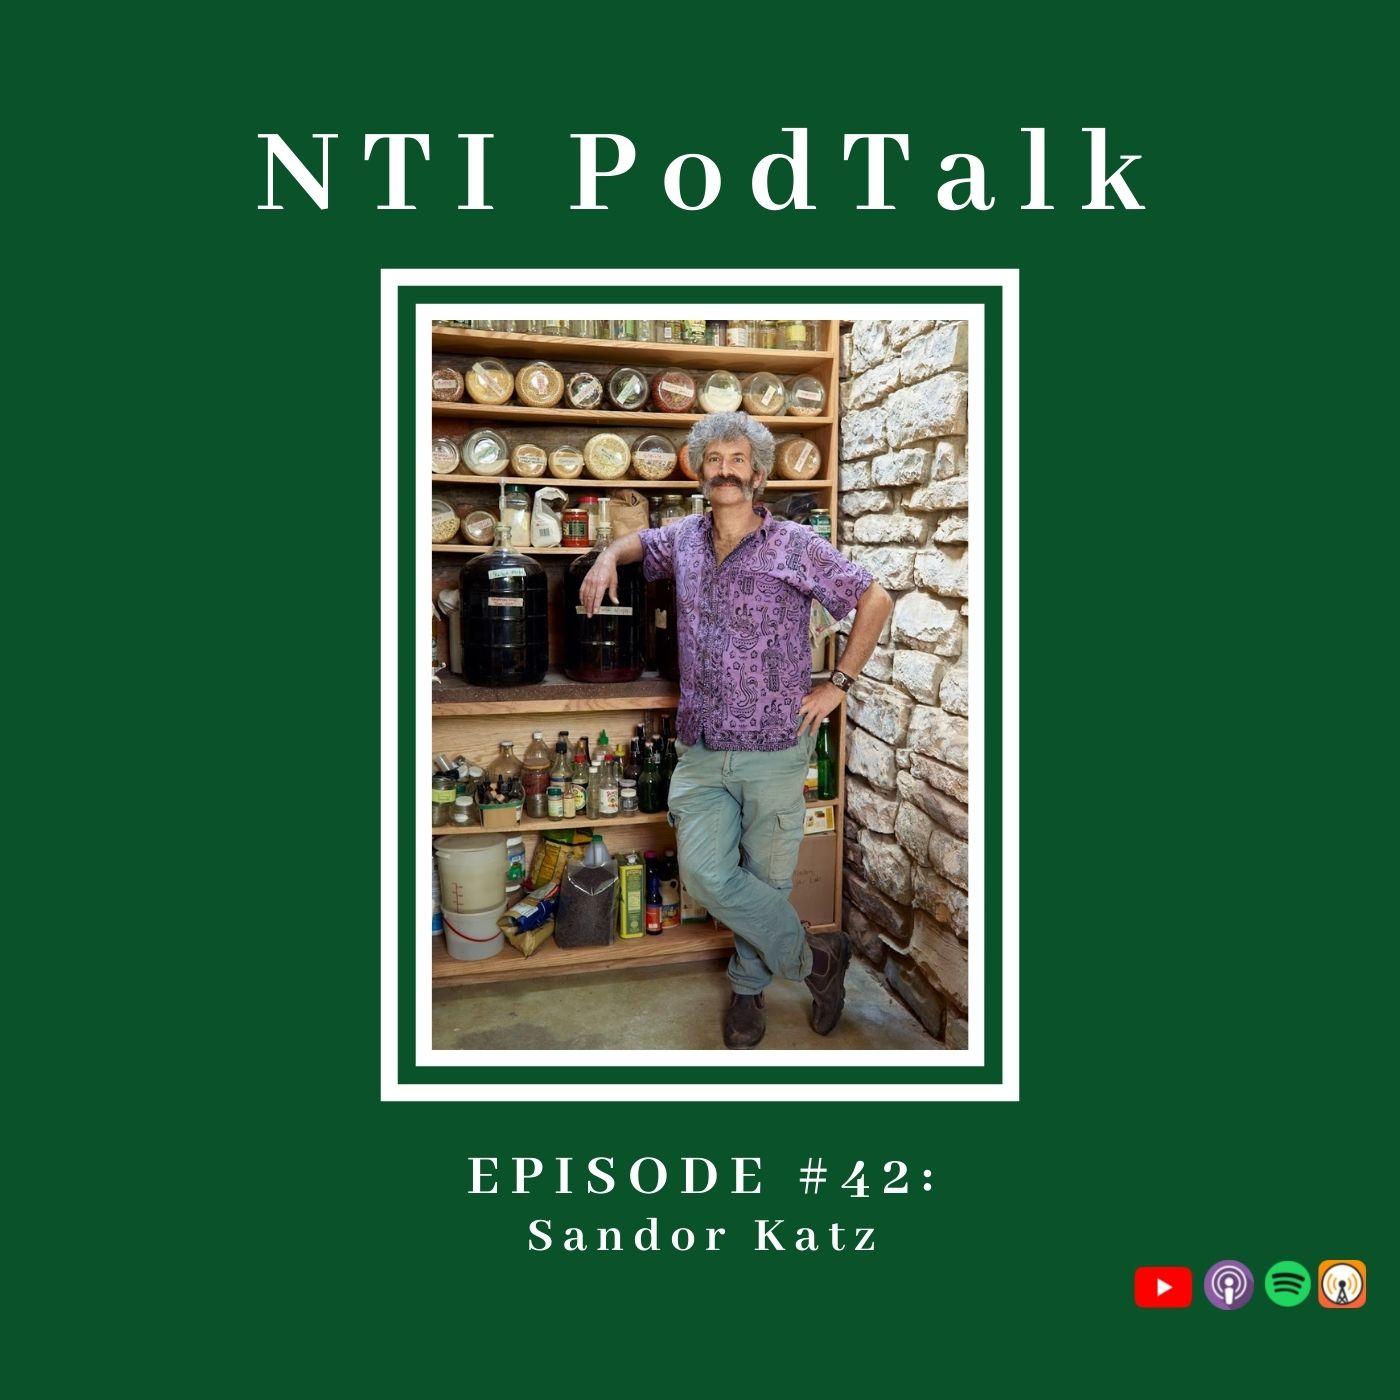 Featured image for “NTI PodTalk with Sandor Katz”